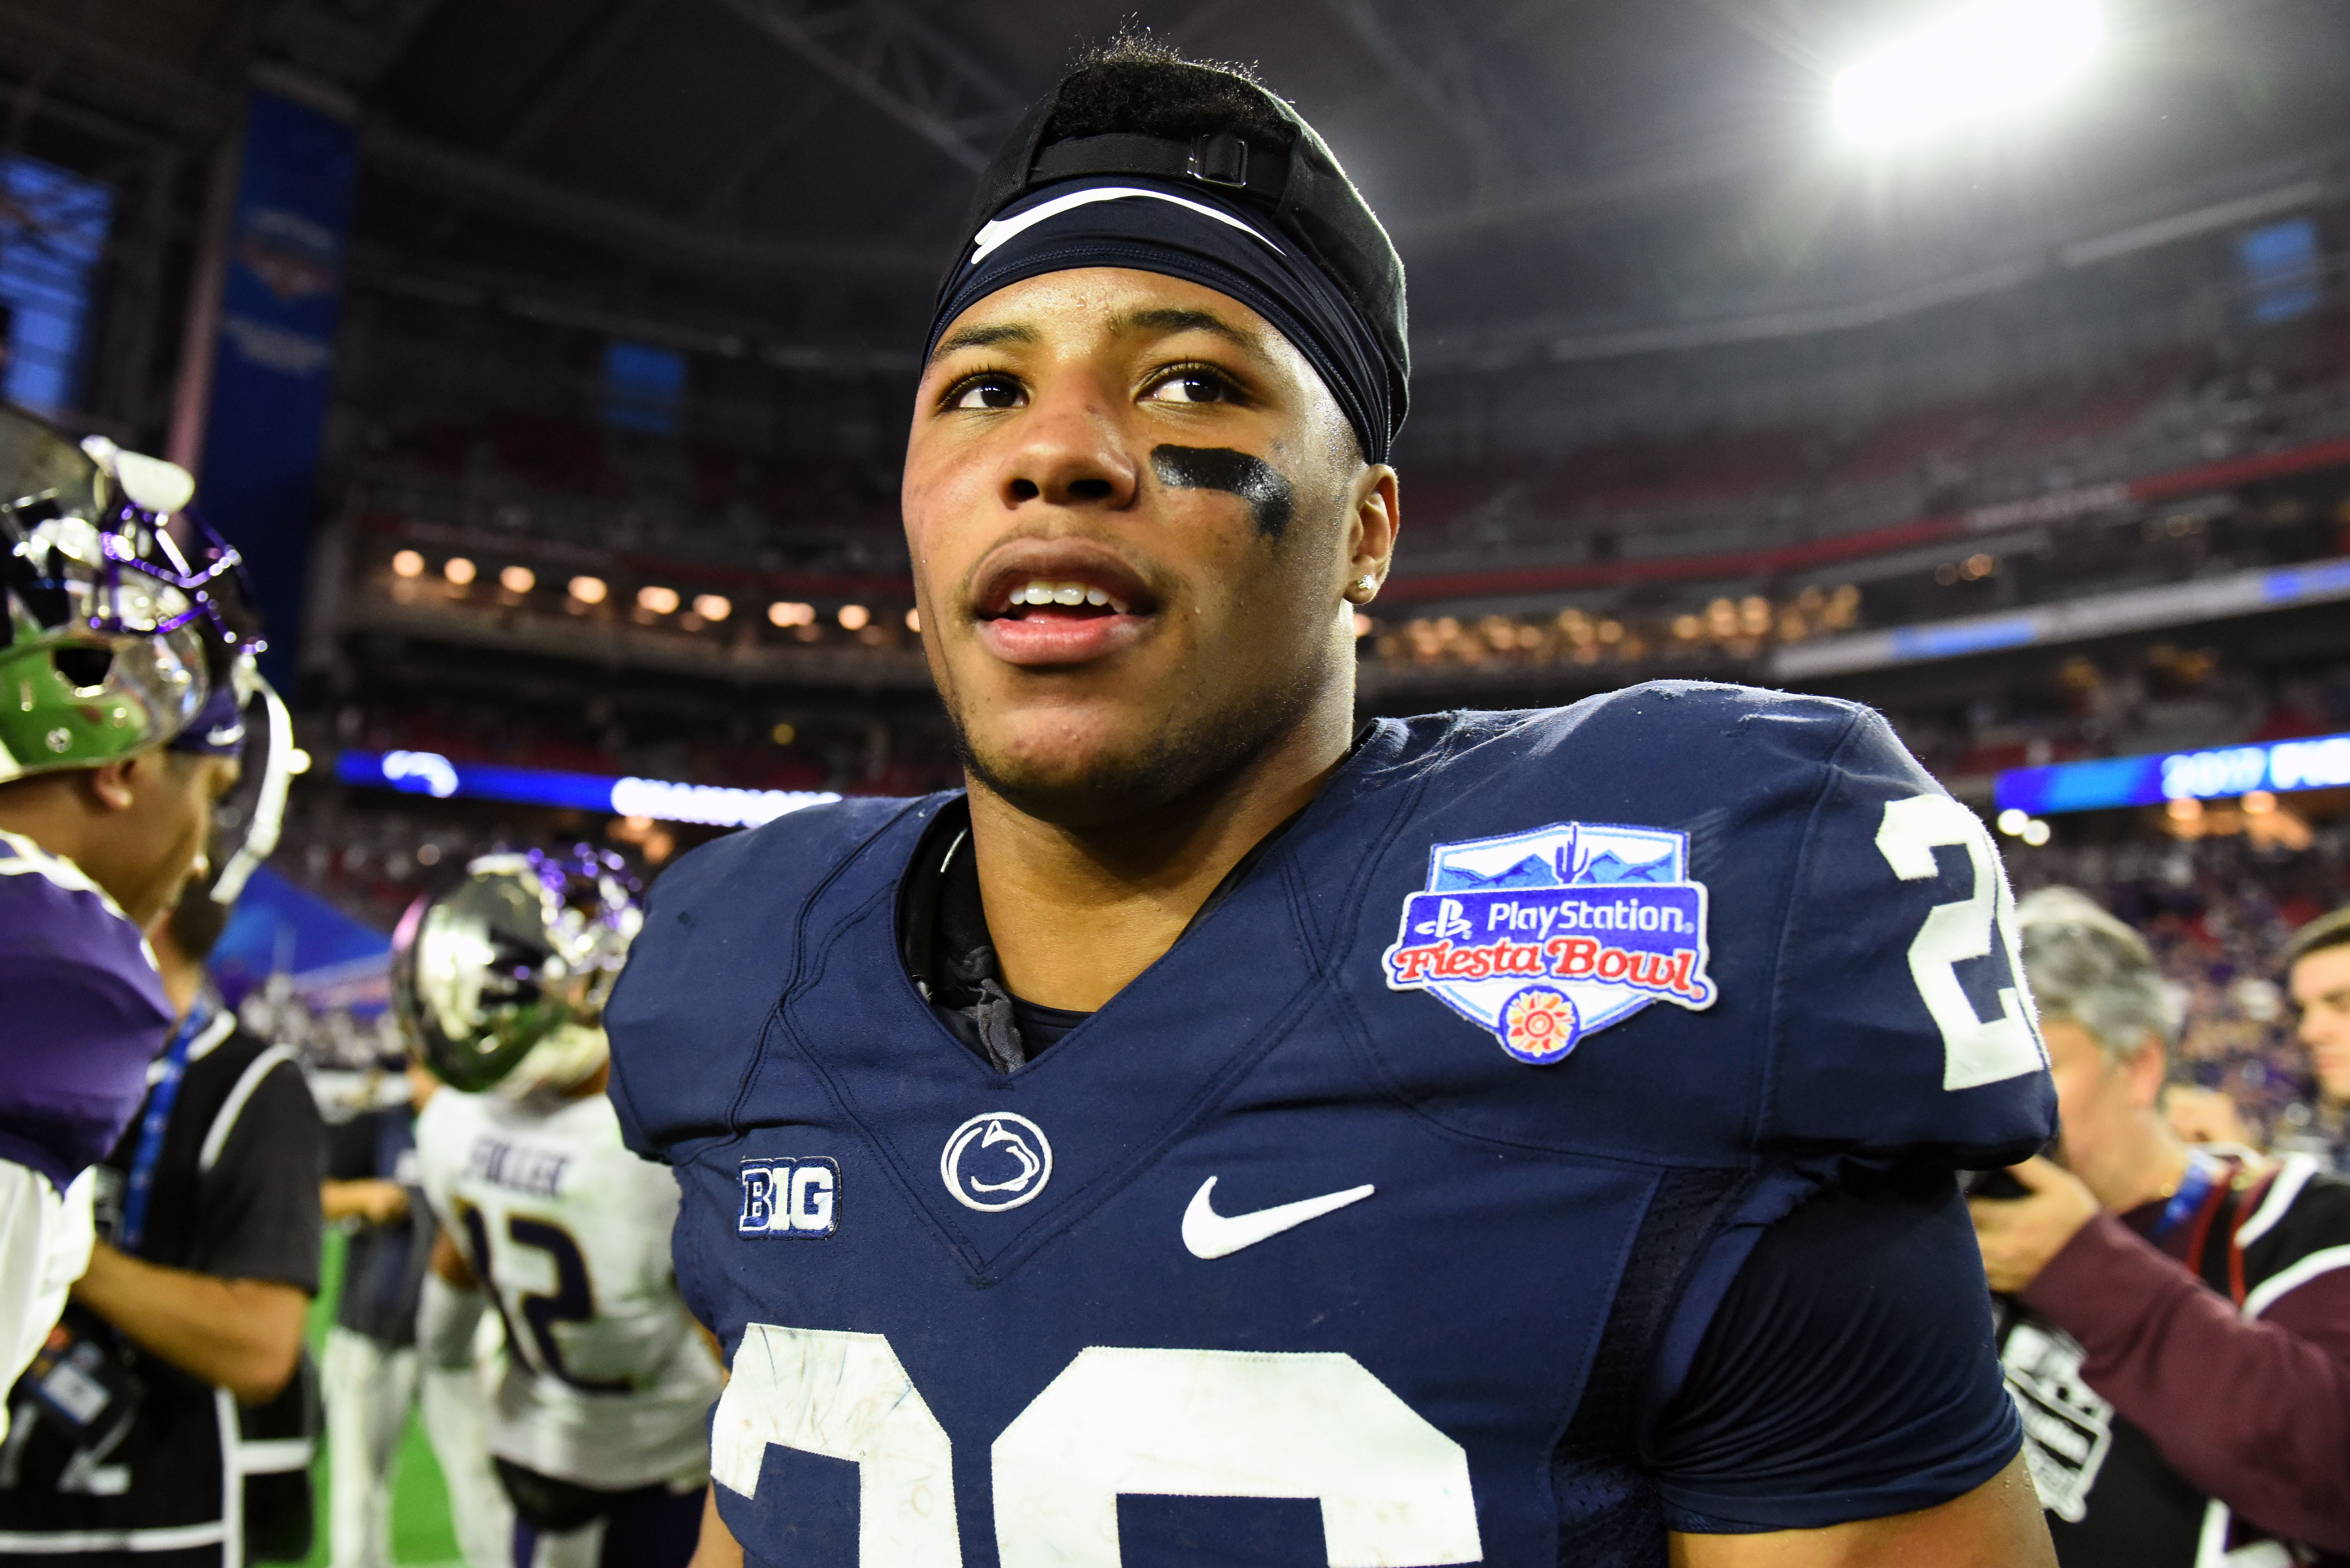 Could Penn State's Saquon Barkley be the best running back in the